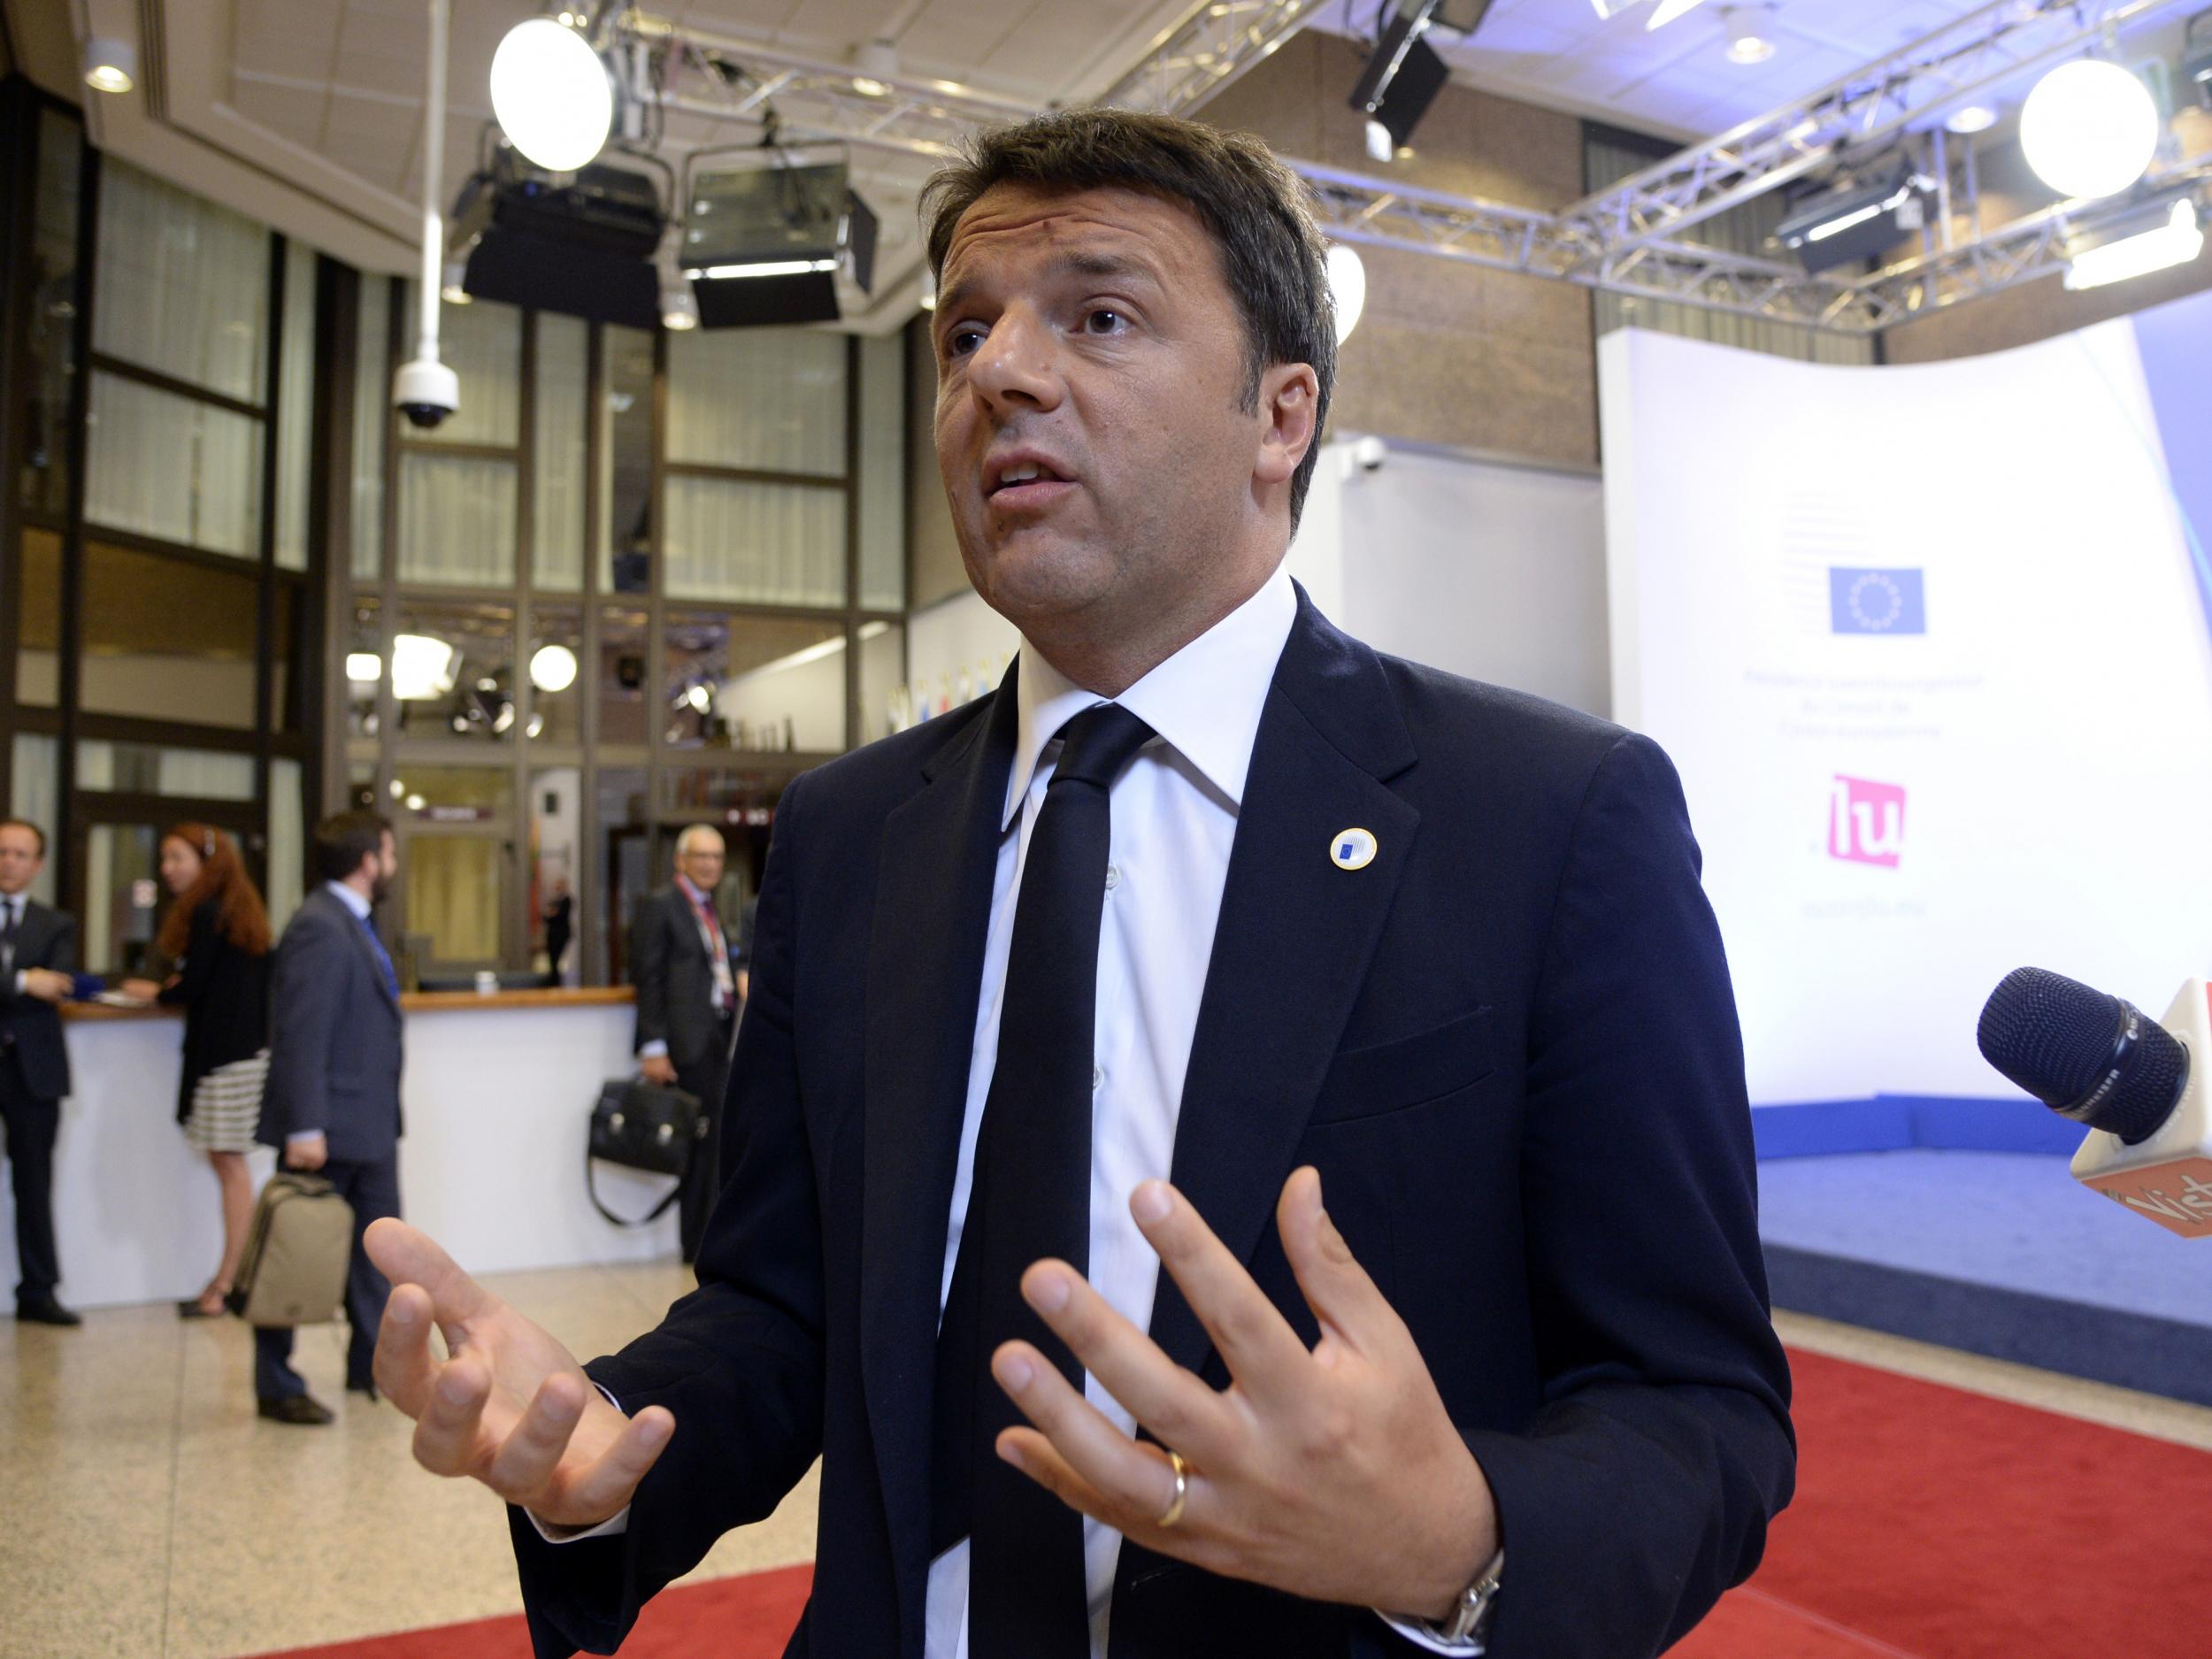 Italian Prime Minister Matteo Renzi is believed to be very, very worried